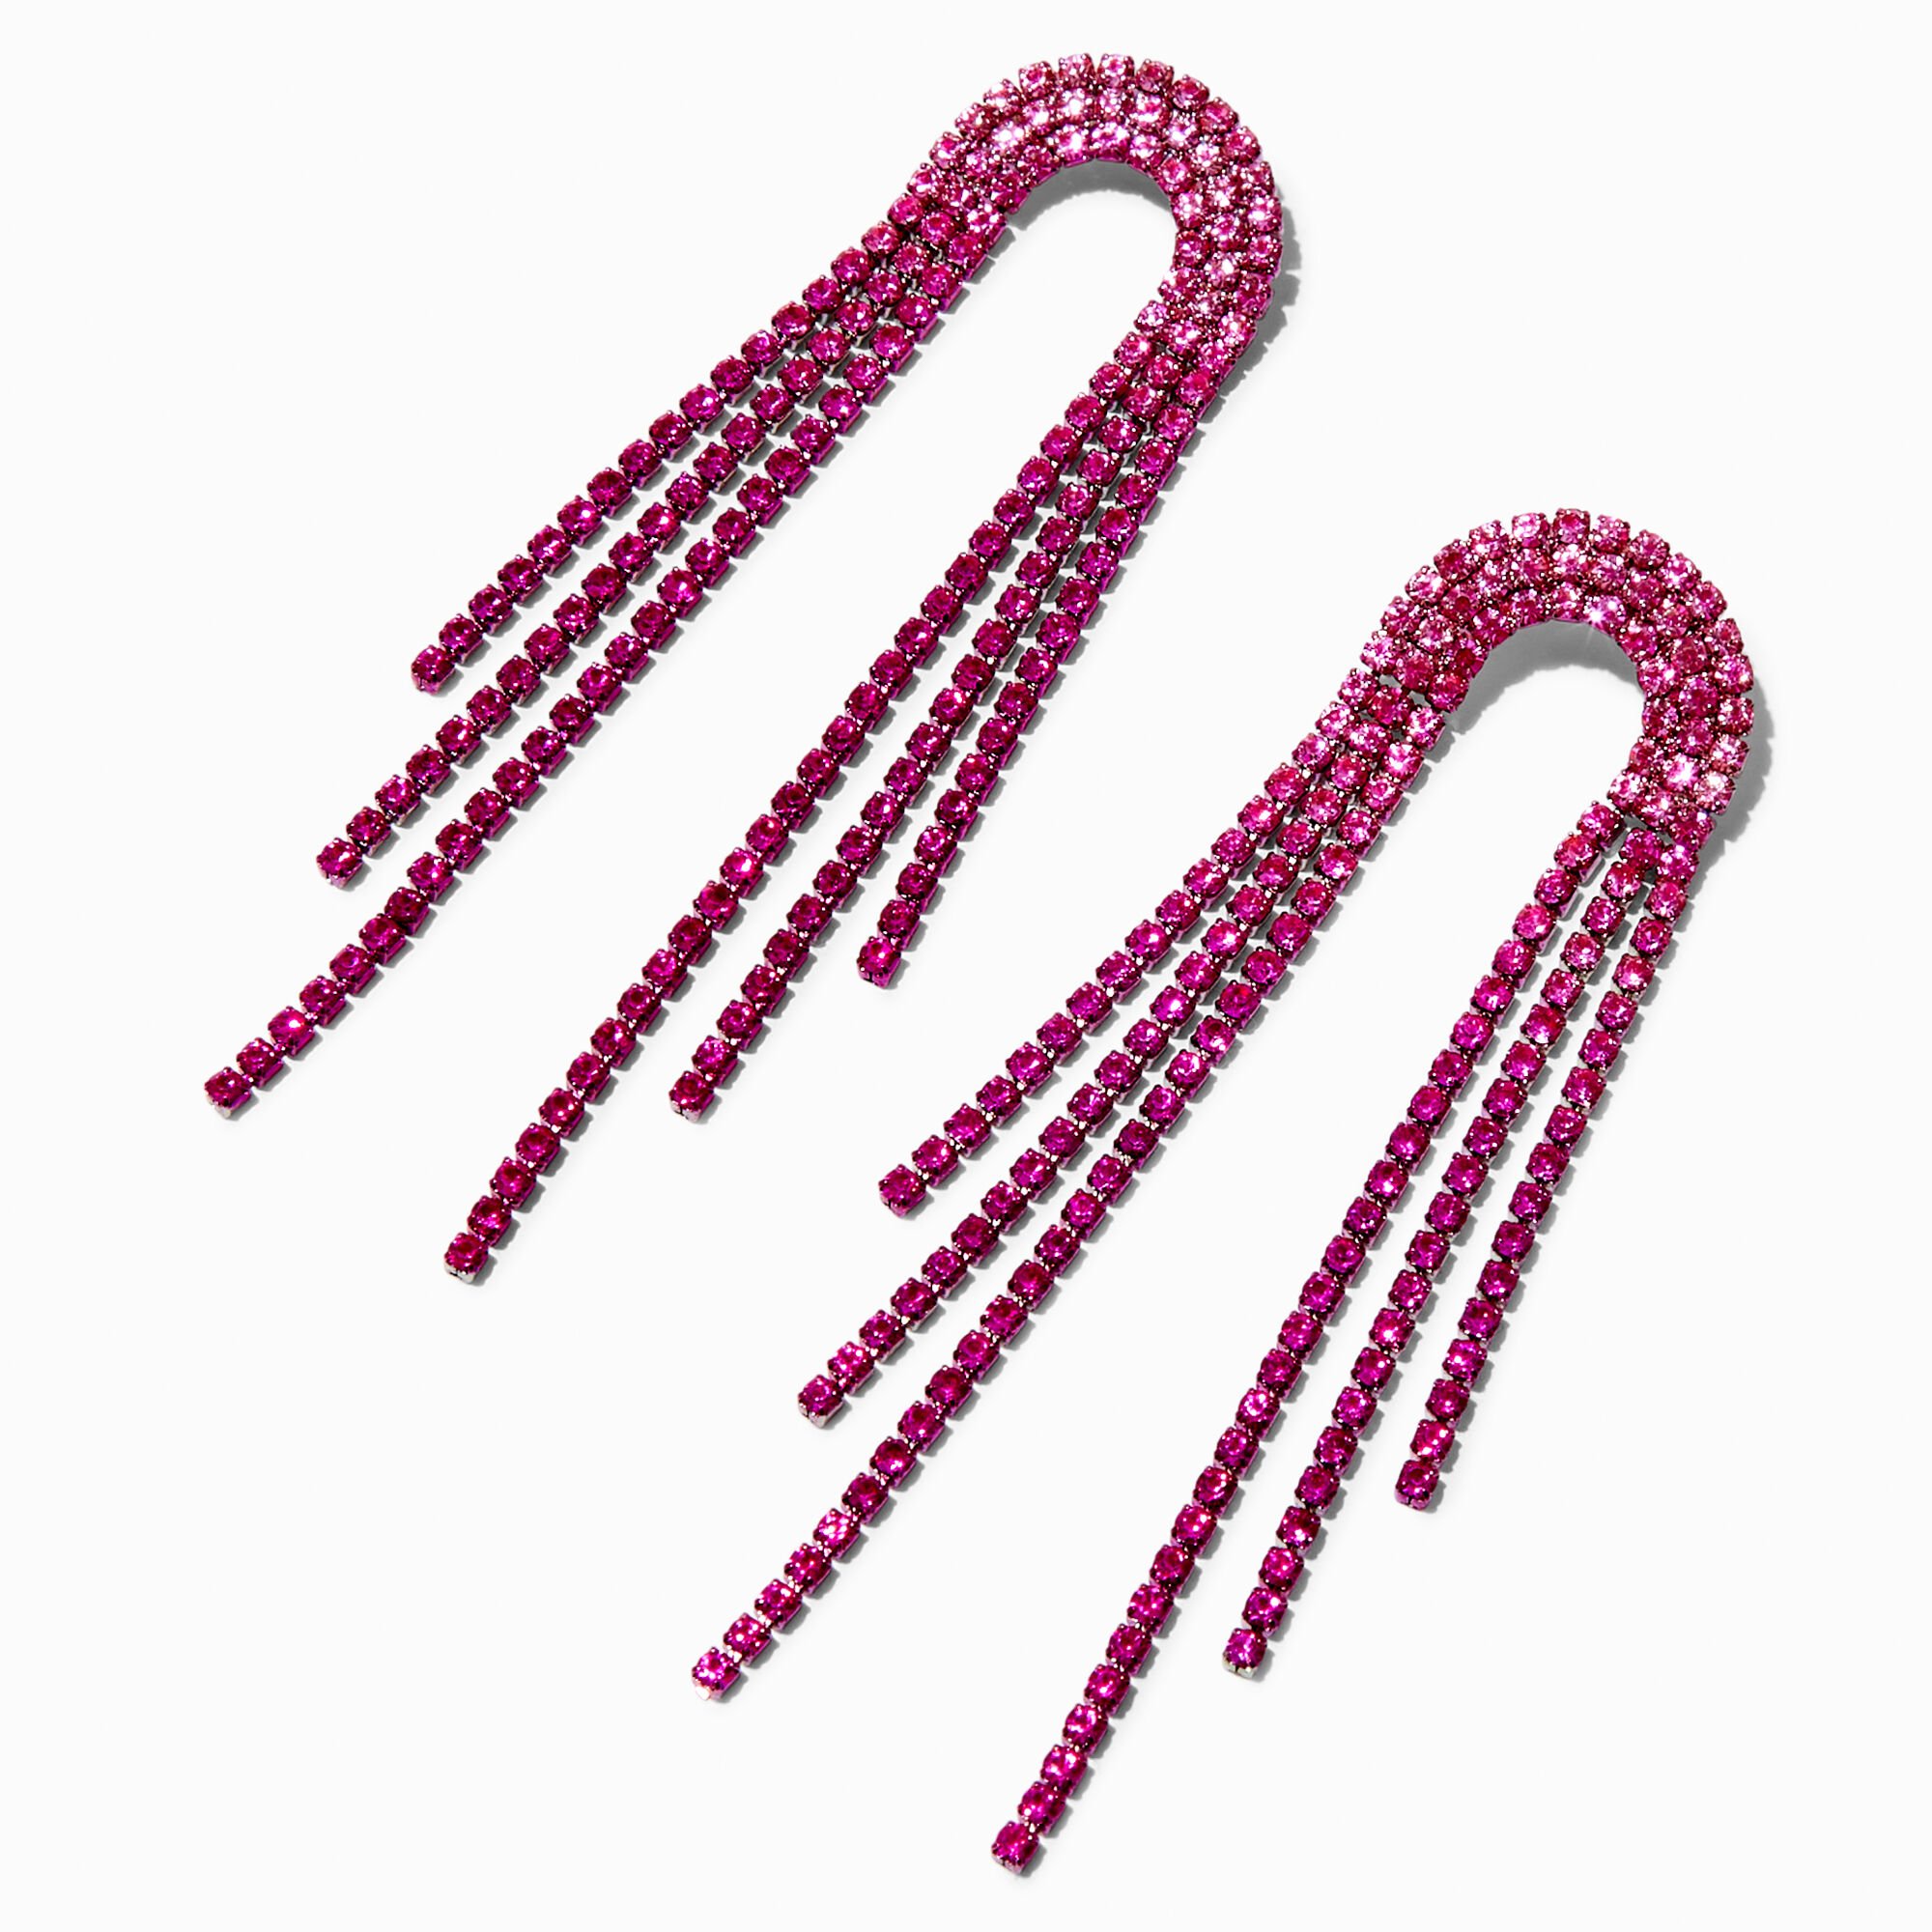 View Claires Crystal Lasso Fringe 325 Drop Earrings Fuchsia information